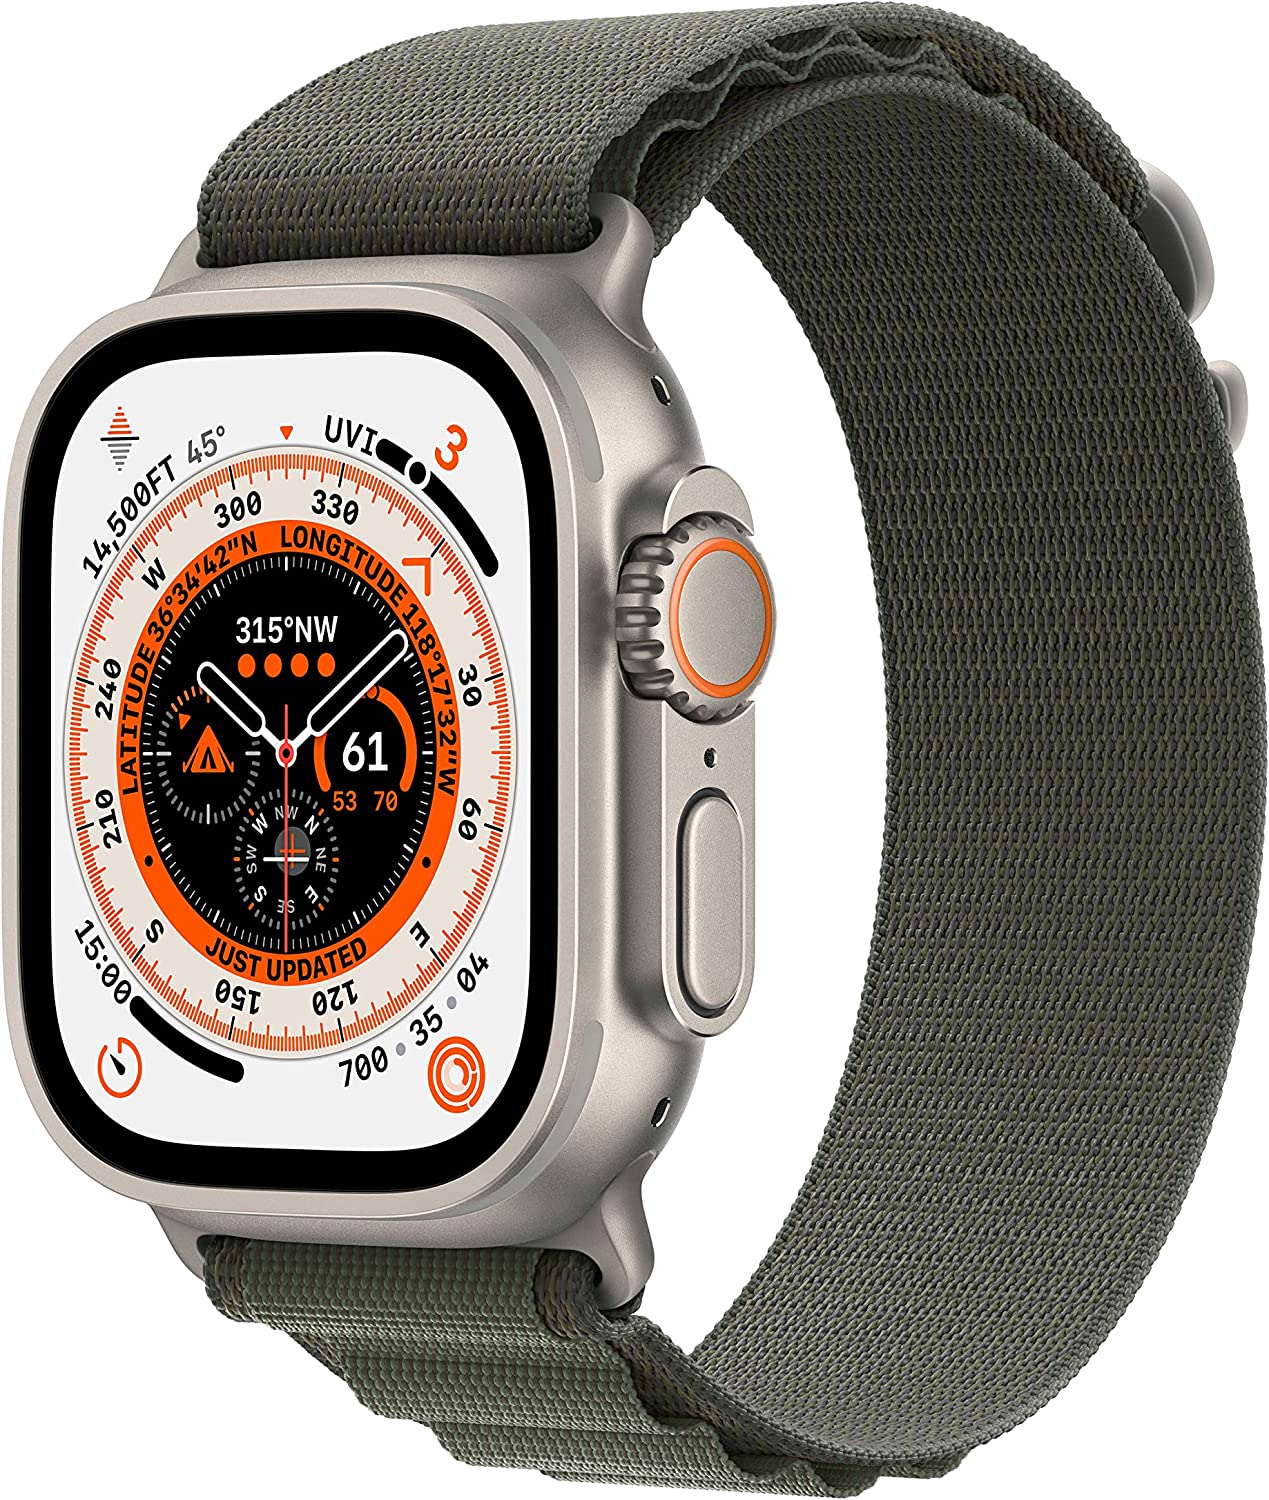 Apple Watch Ultra with smart features